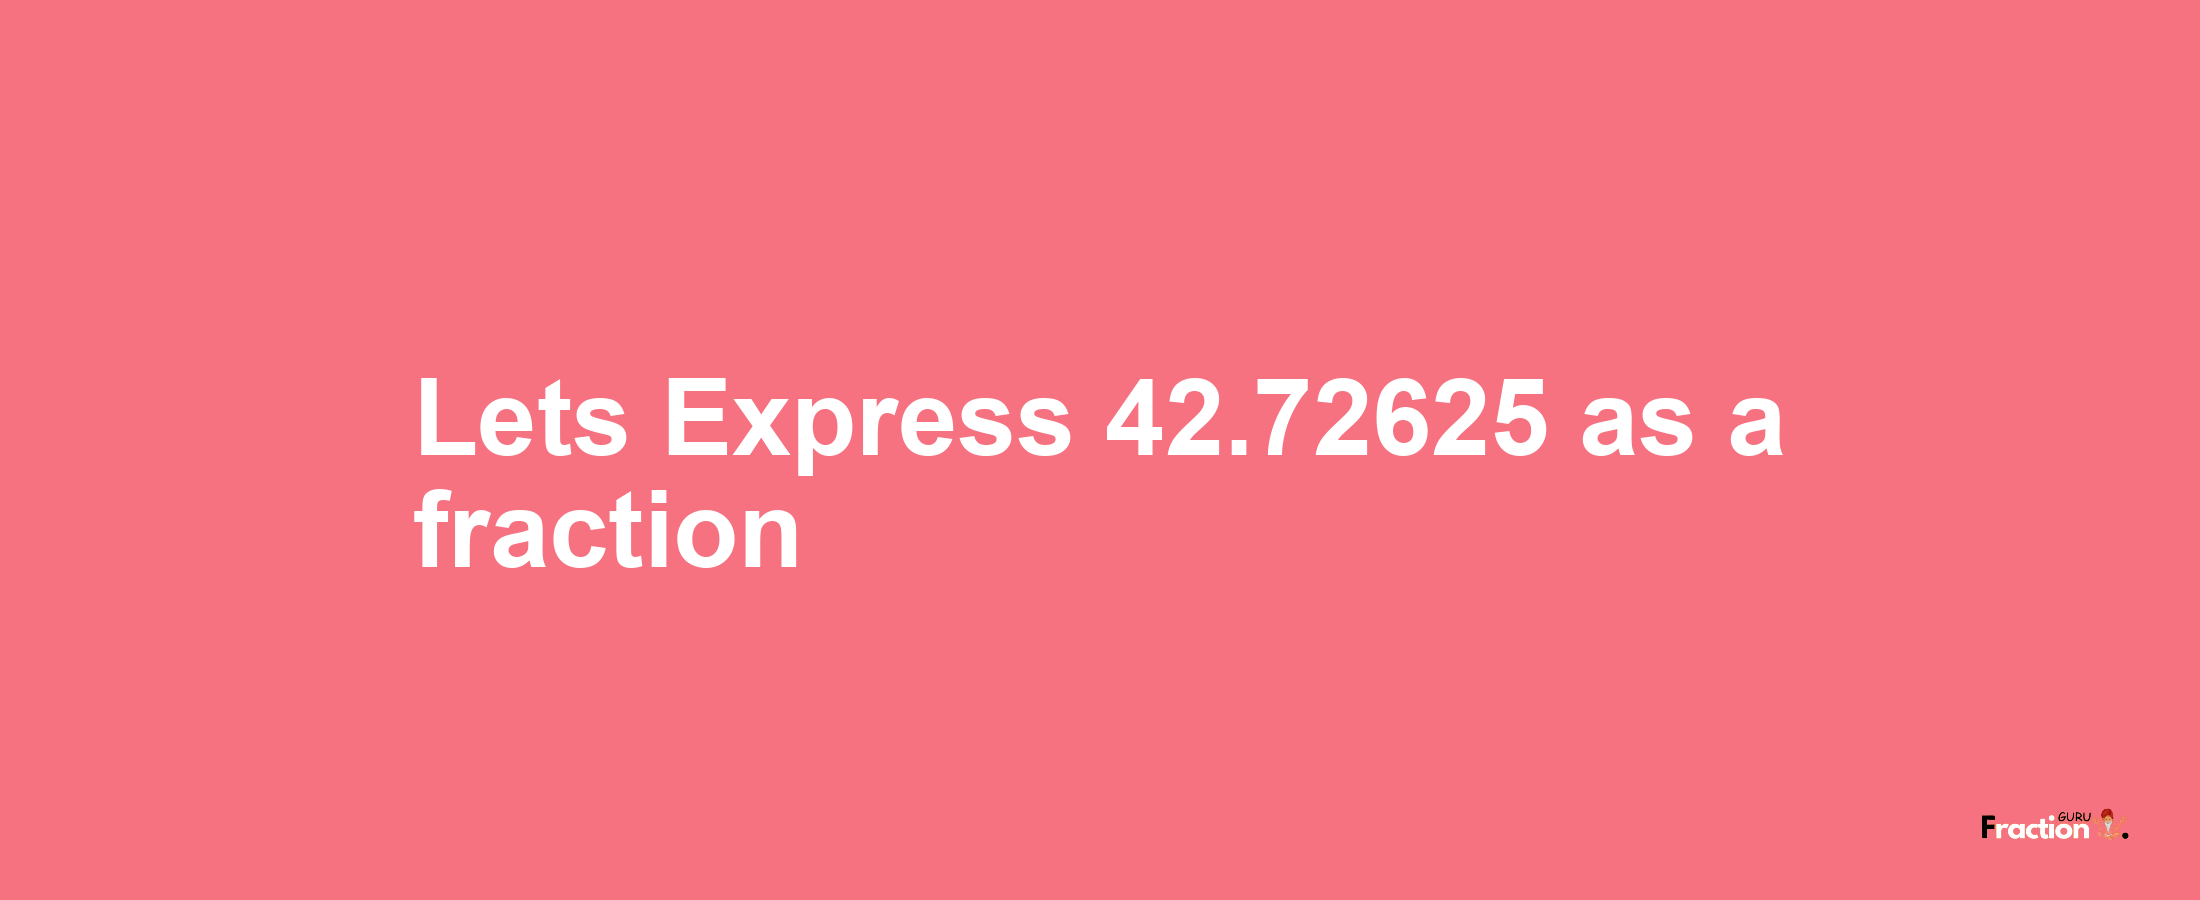 Lets Express 42.72625 as afraction